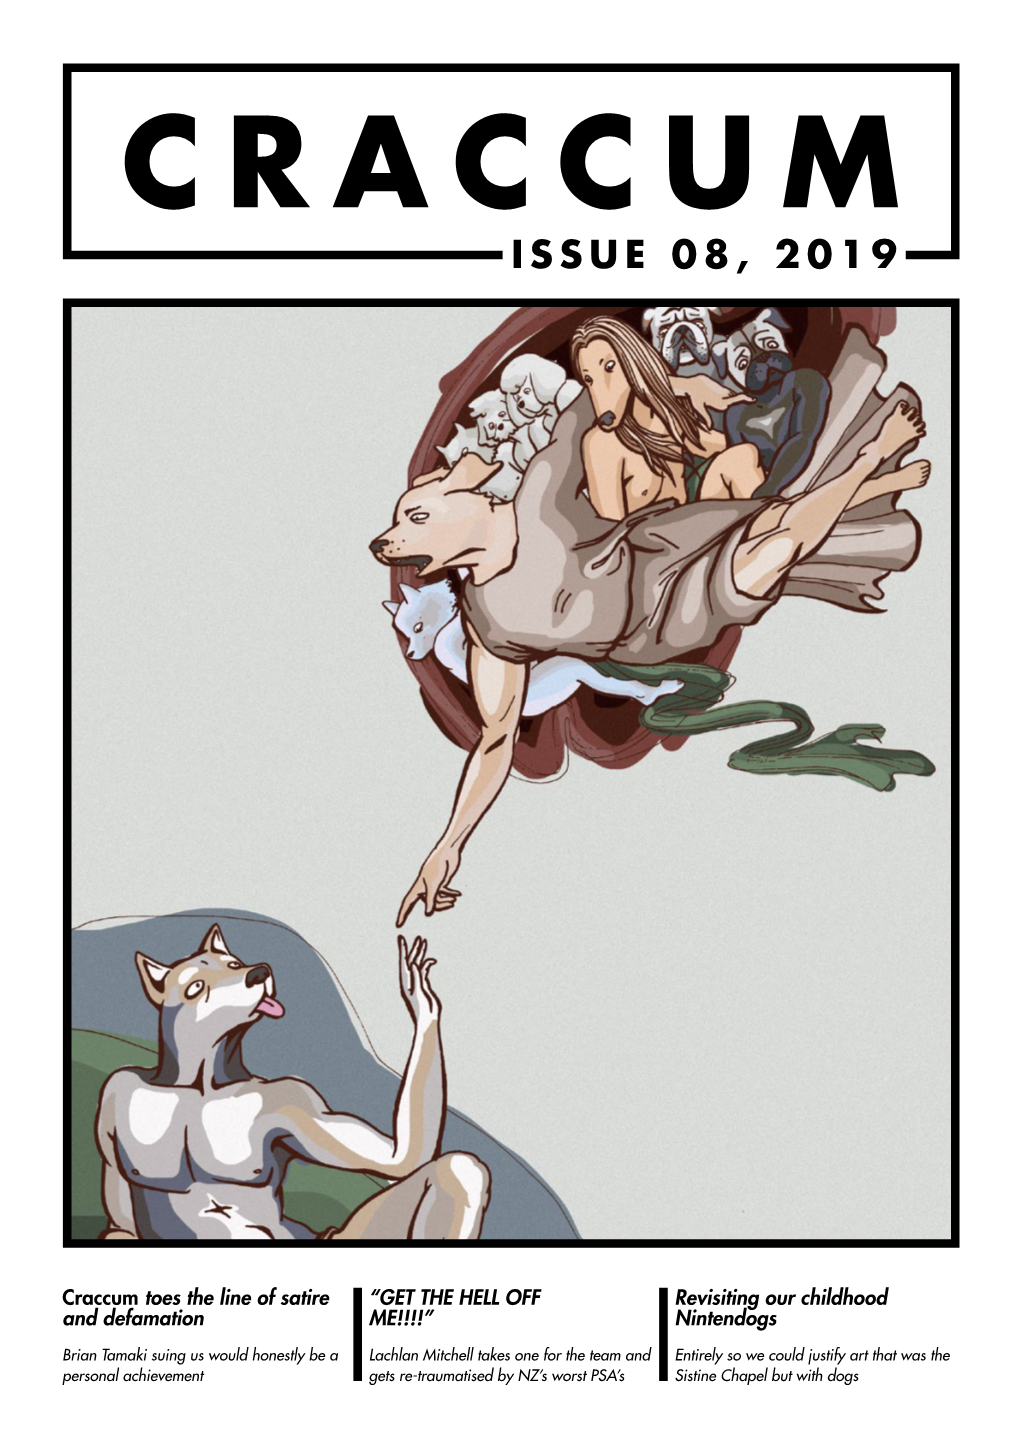 Issue 08, 2019